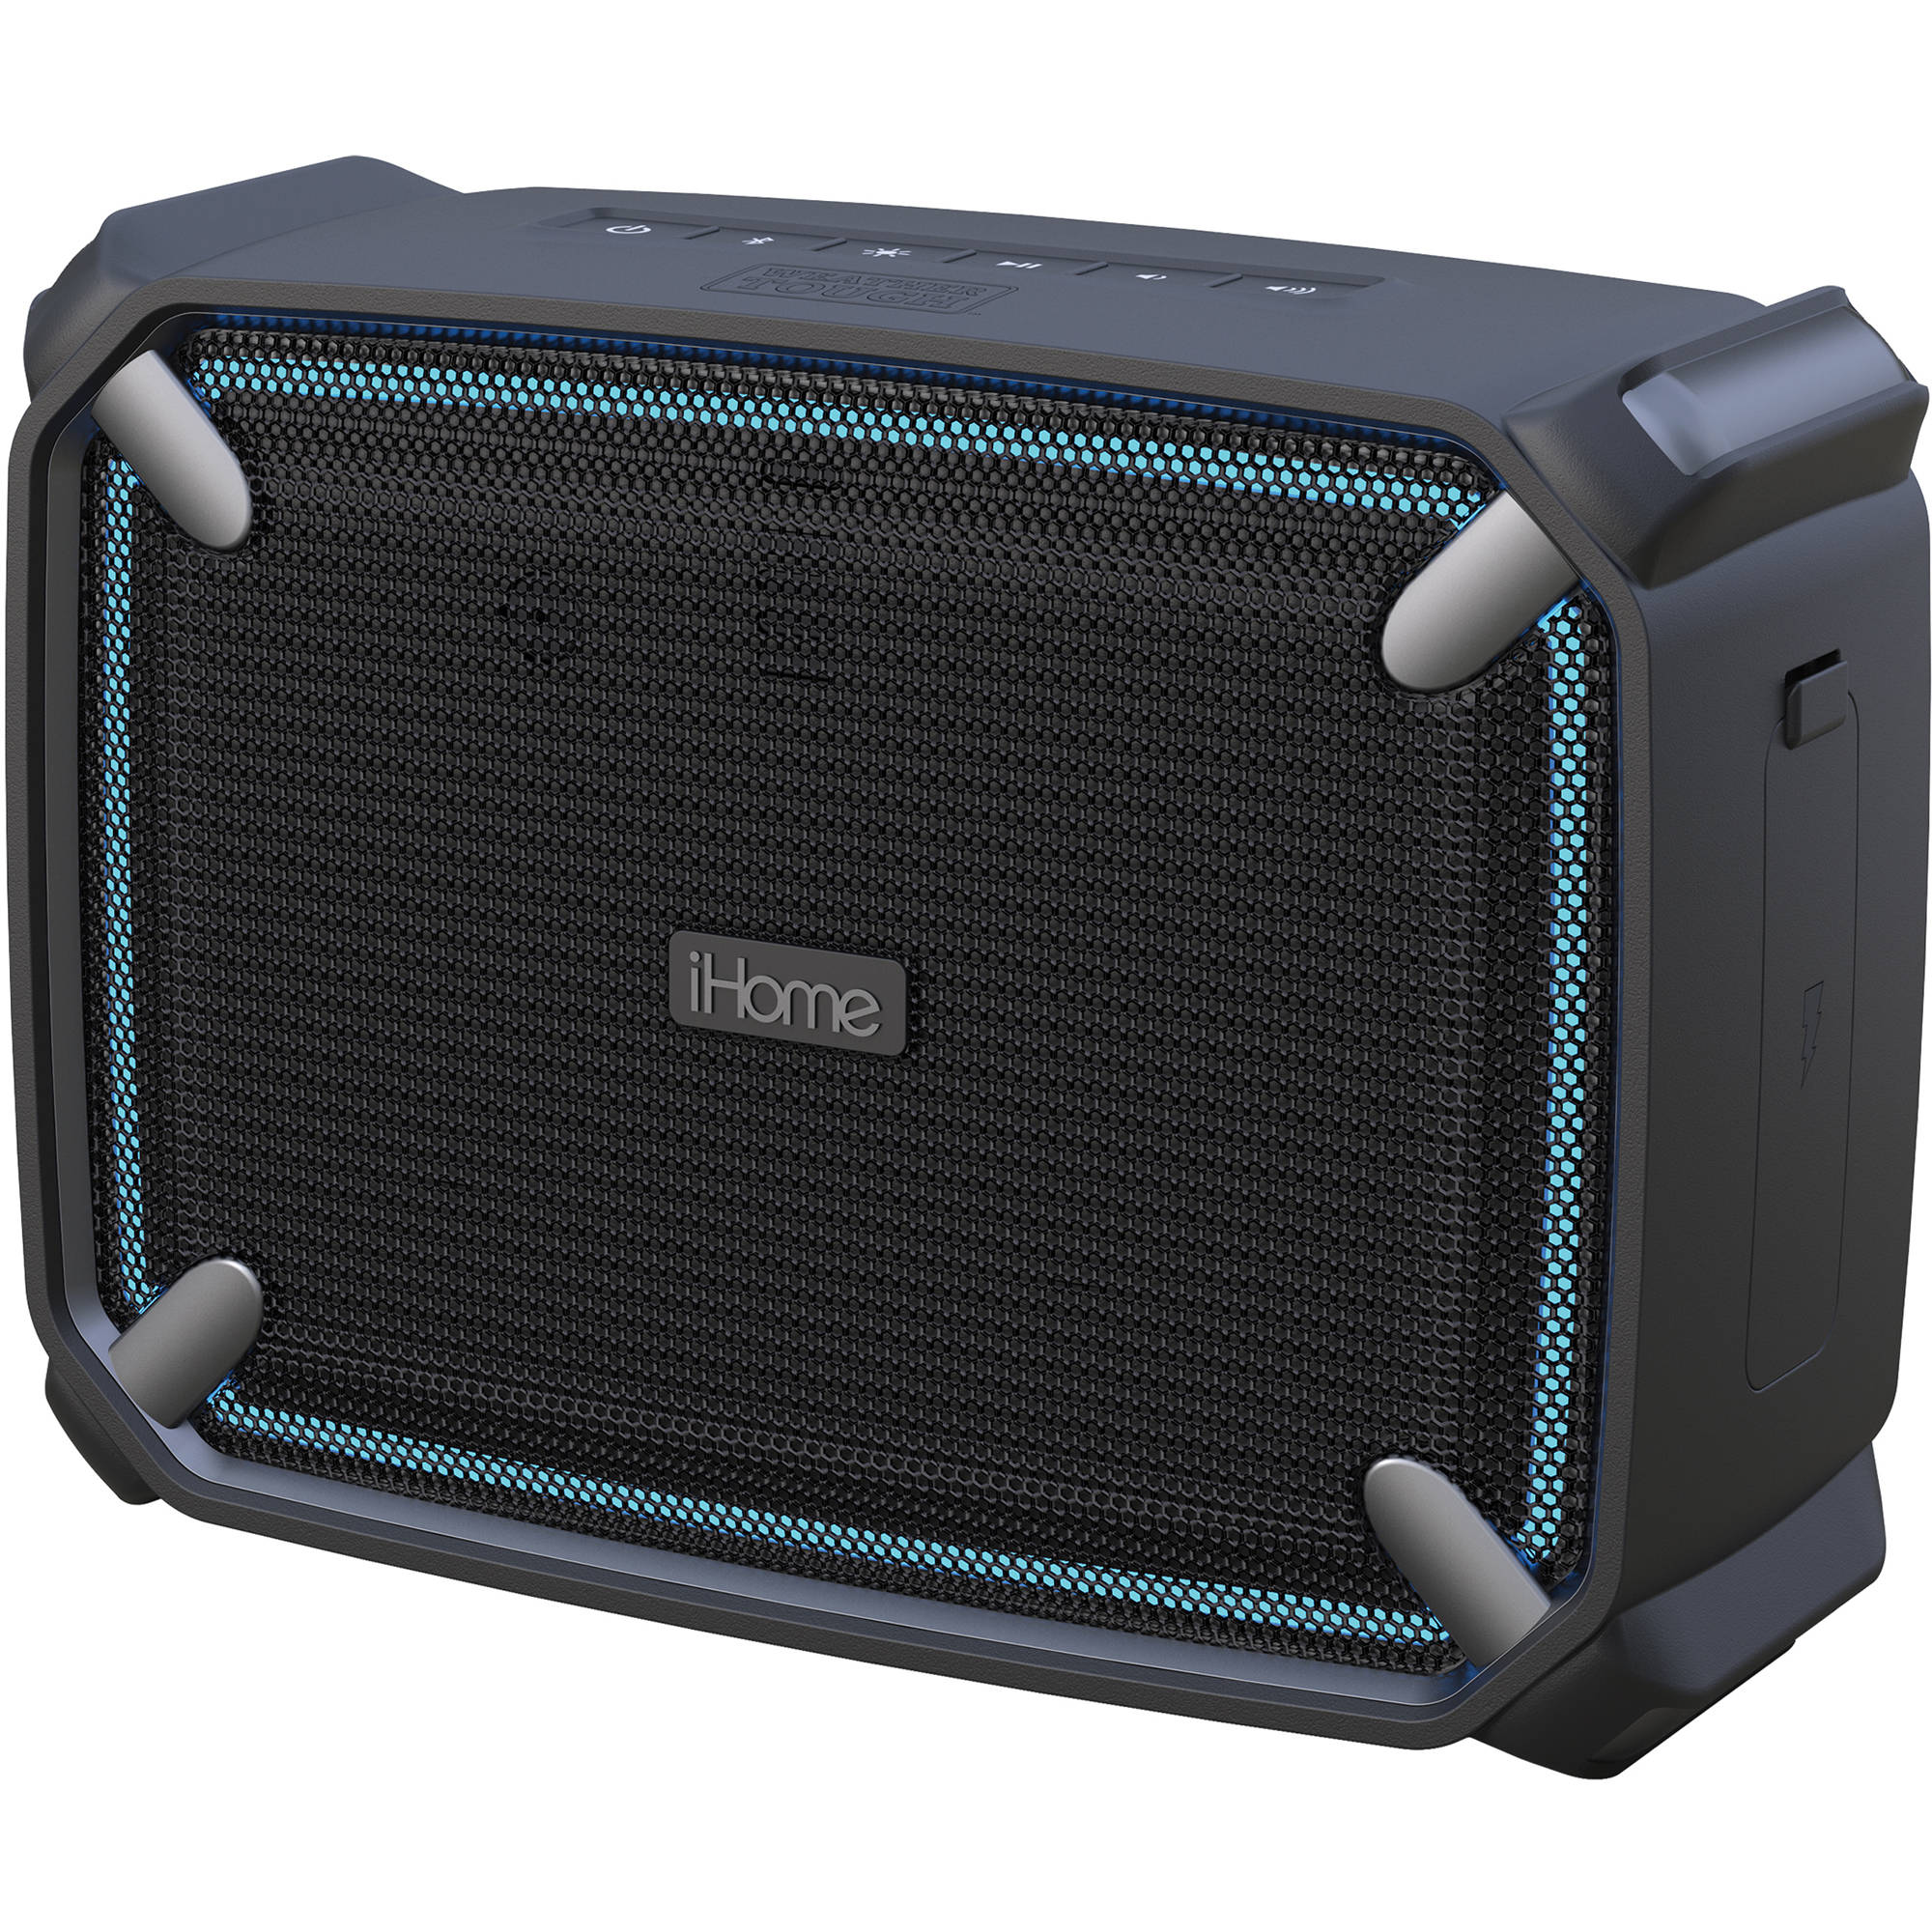 ihome collapsible speaker